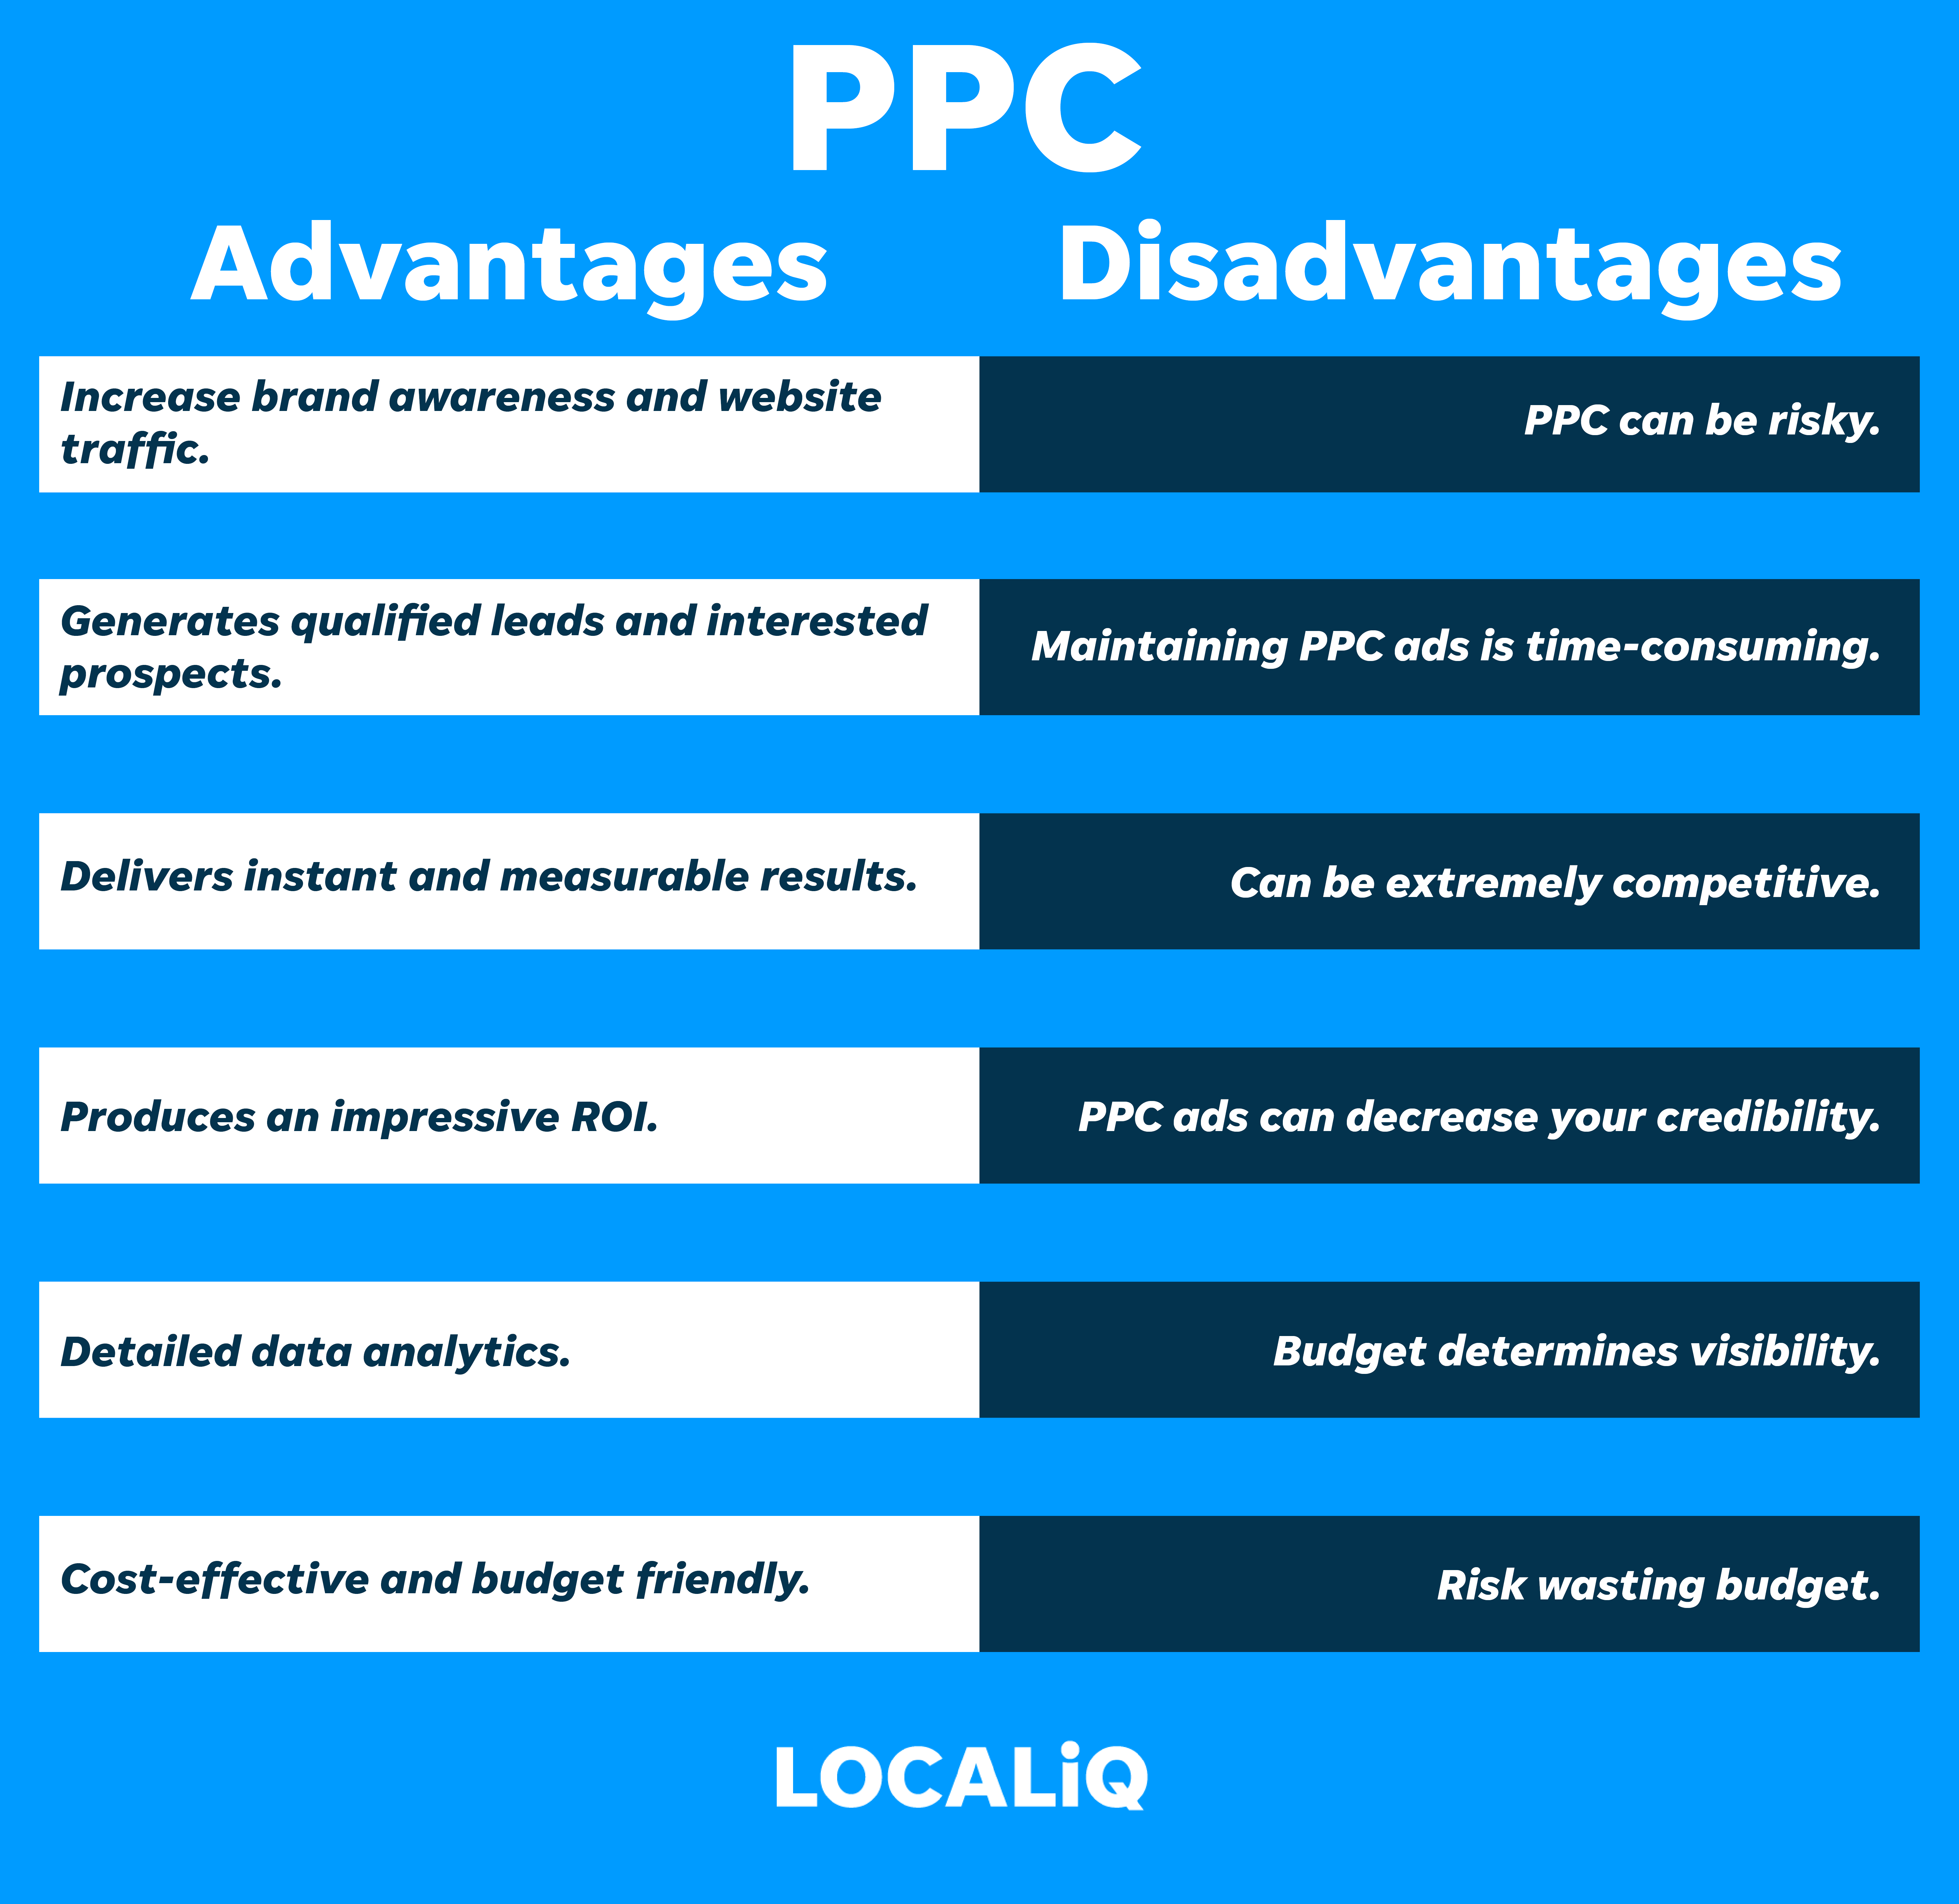 LOCALiQ graphic to show the advantages and disadvantages of PPC